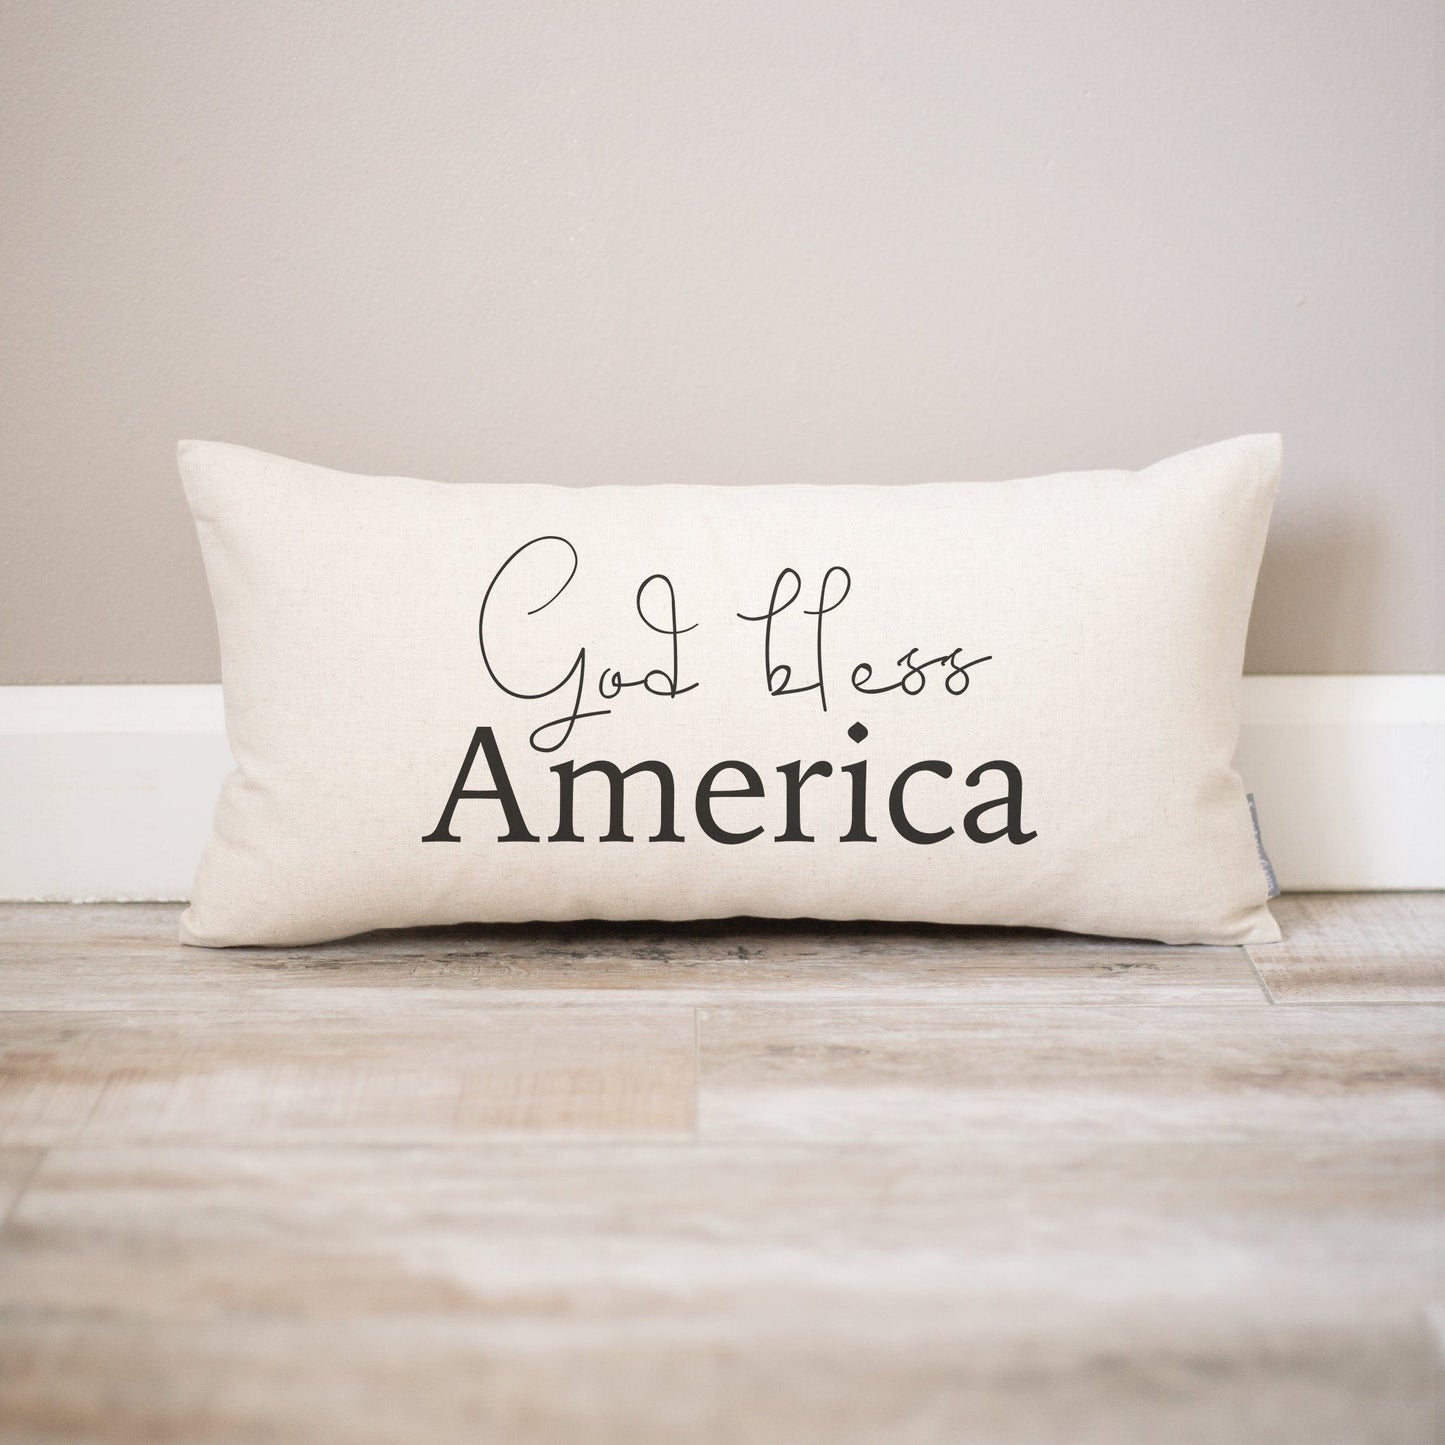 God Bless America Pillow | Forth of July Decorations | 4th of July Decor Pillow | Independence Day Home Decorations 4th of July Decor Pillow